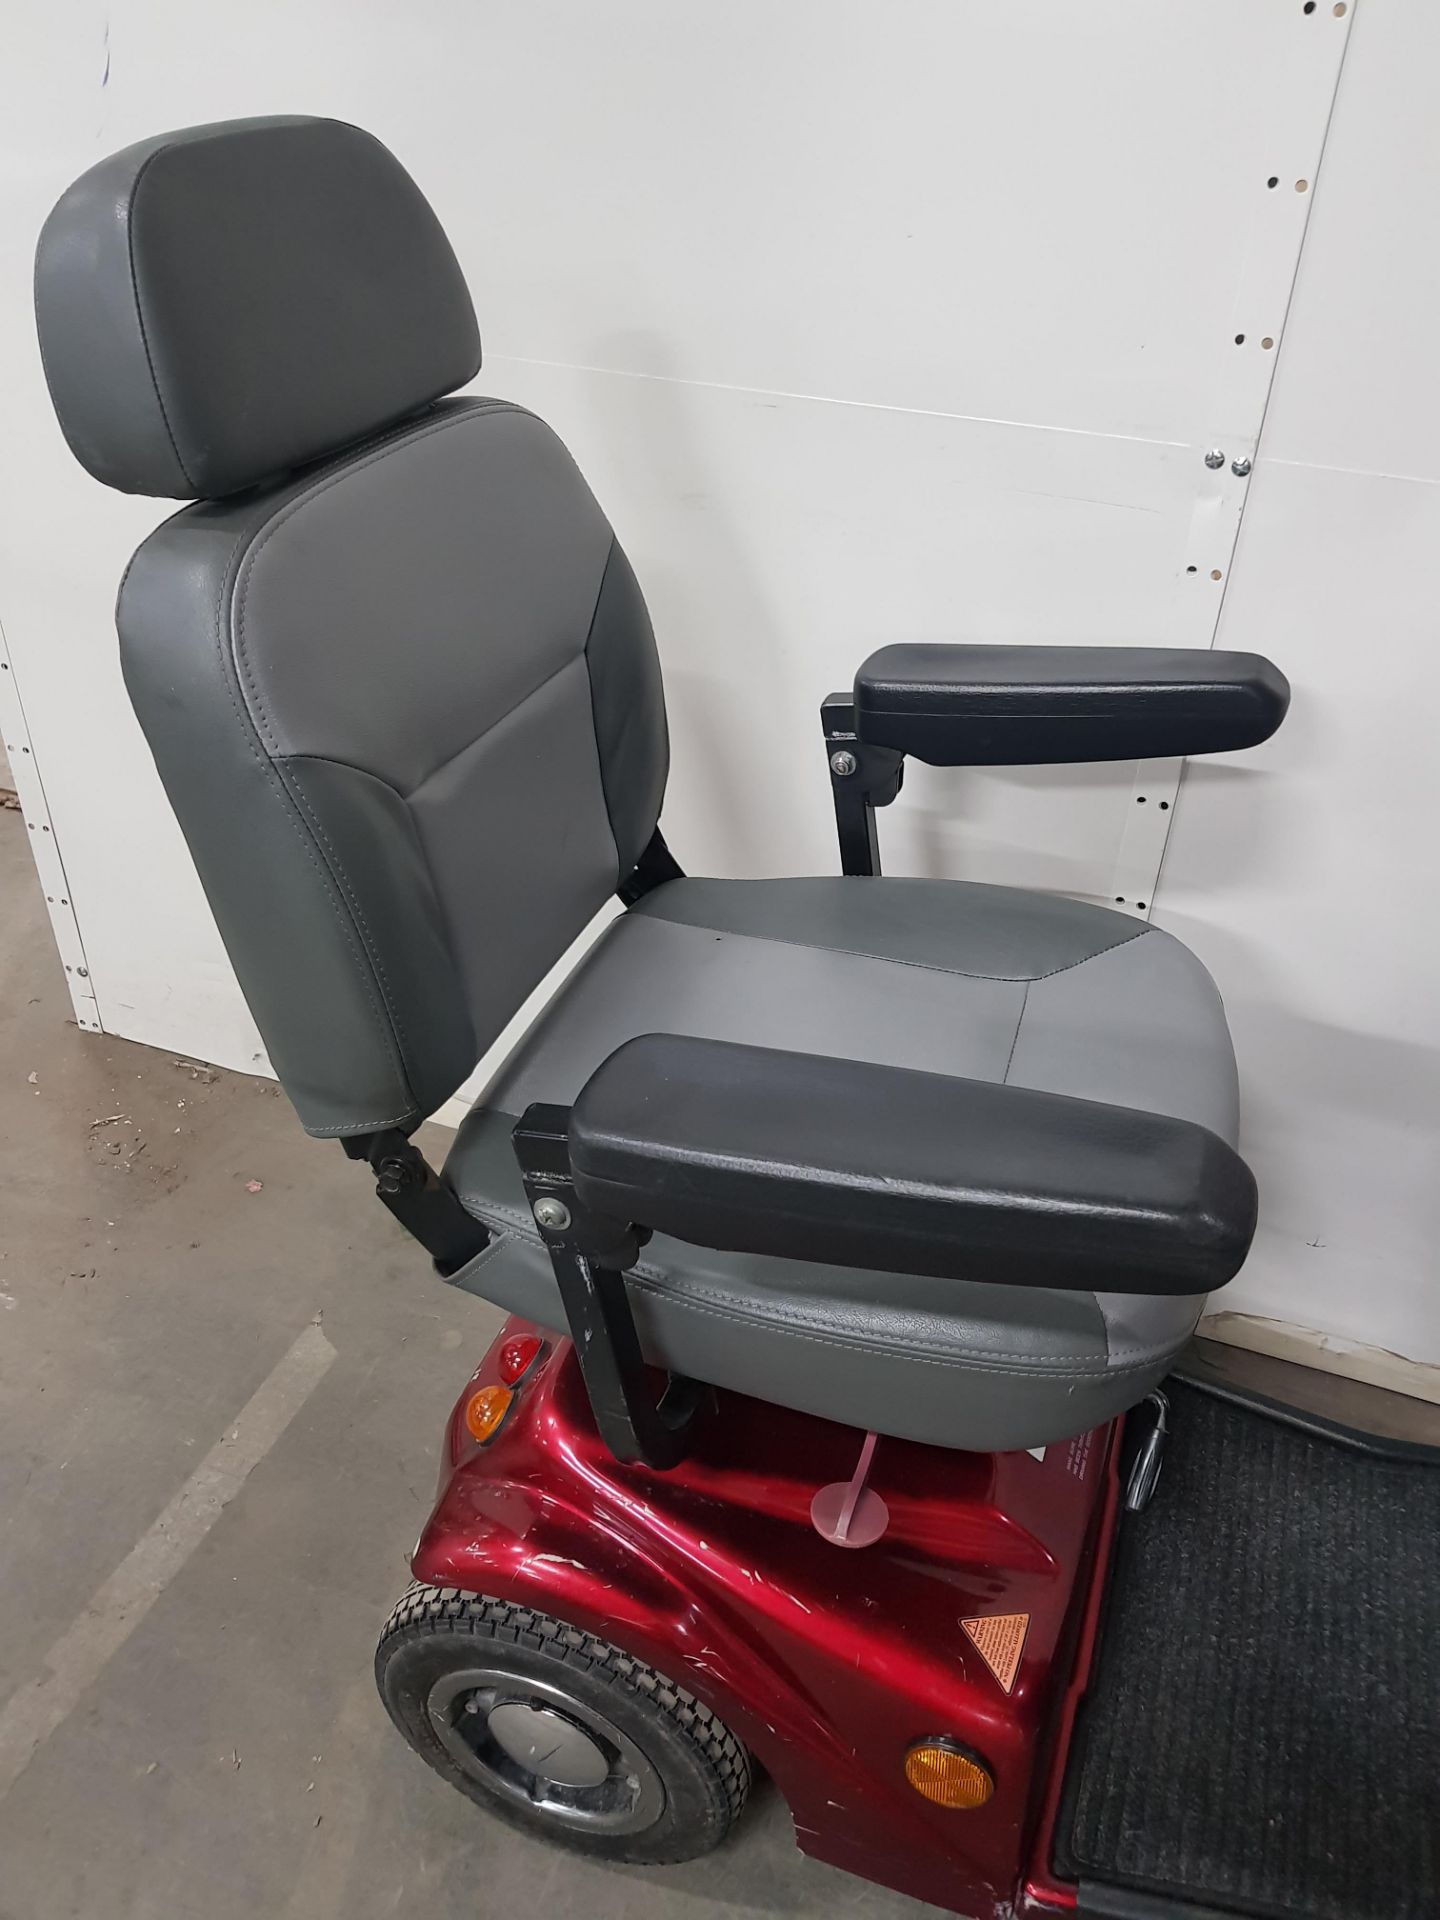 Rascal 388Xl Electric Mobility Scooter 2017 - Image 4 of 8